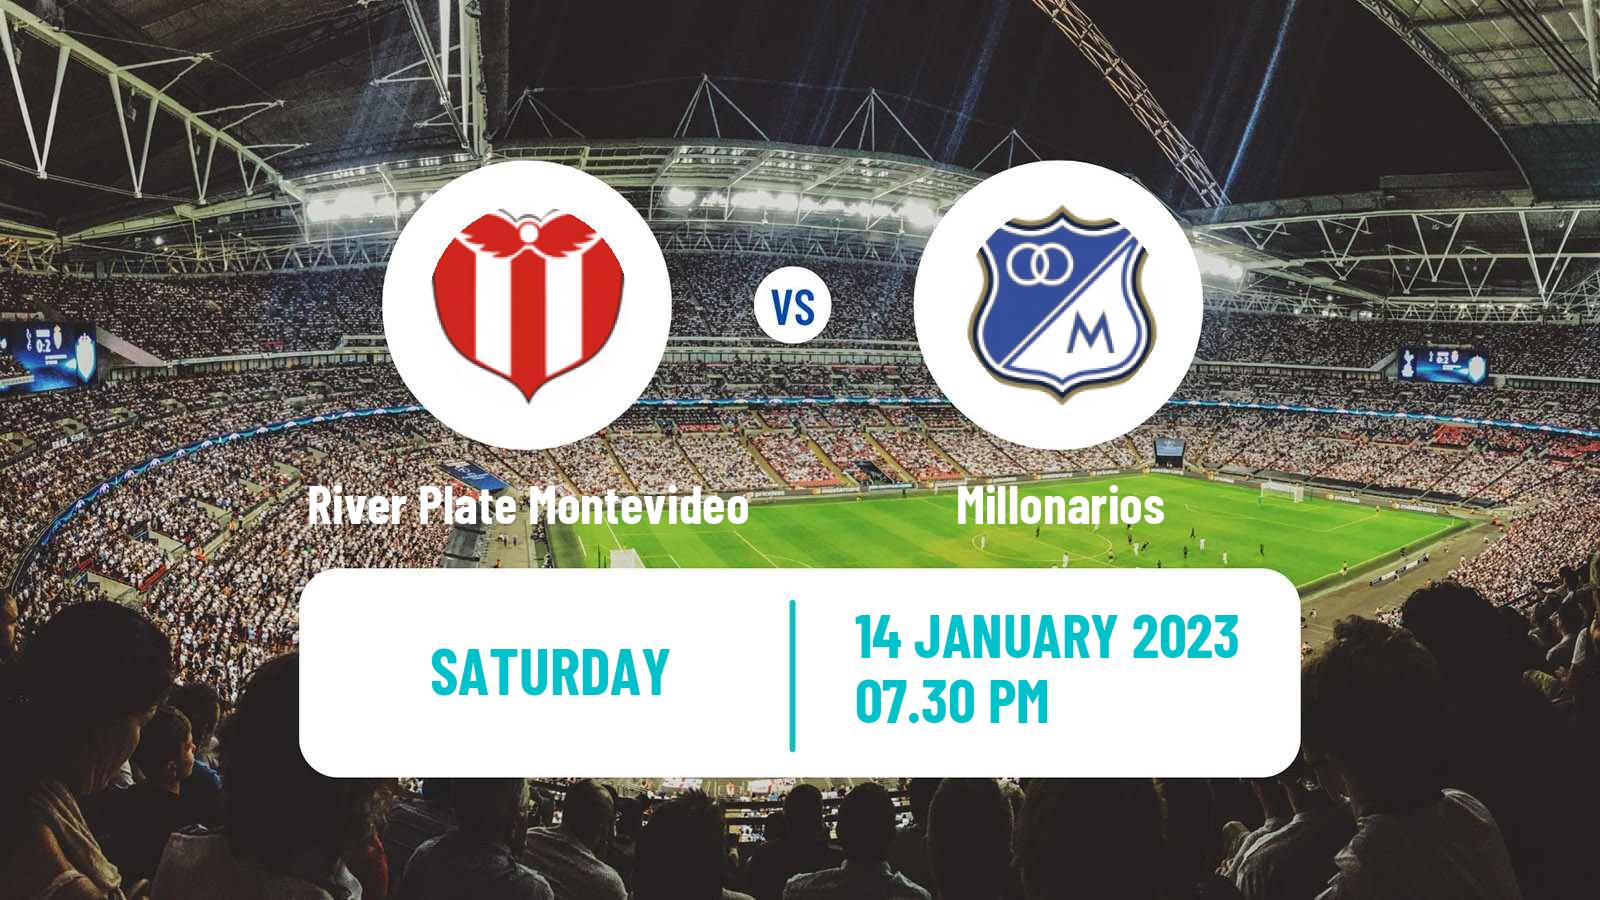 Soccer Club Friendly River Plate Montevideo - Millonarios